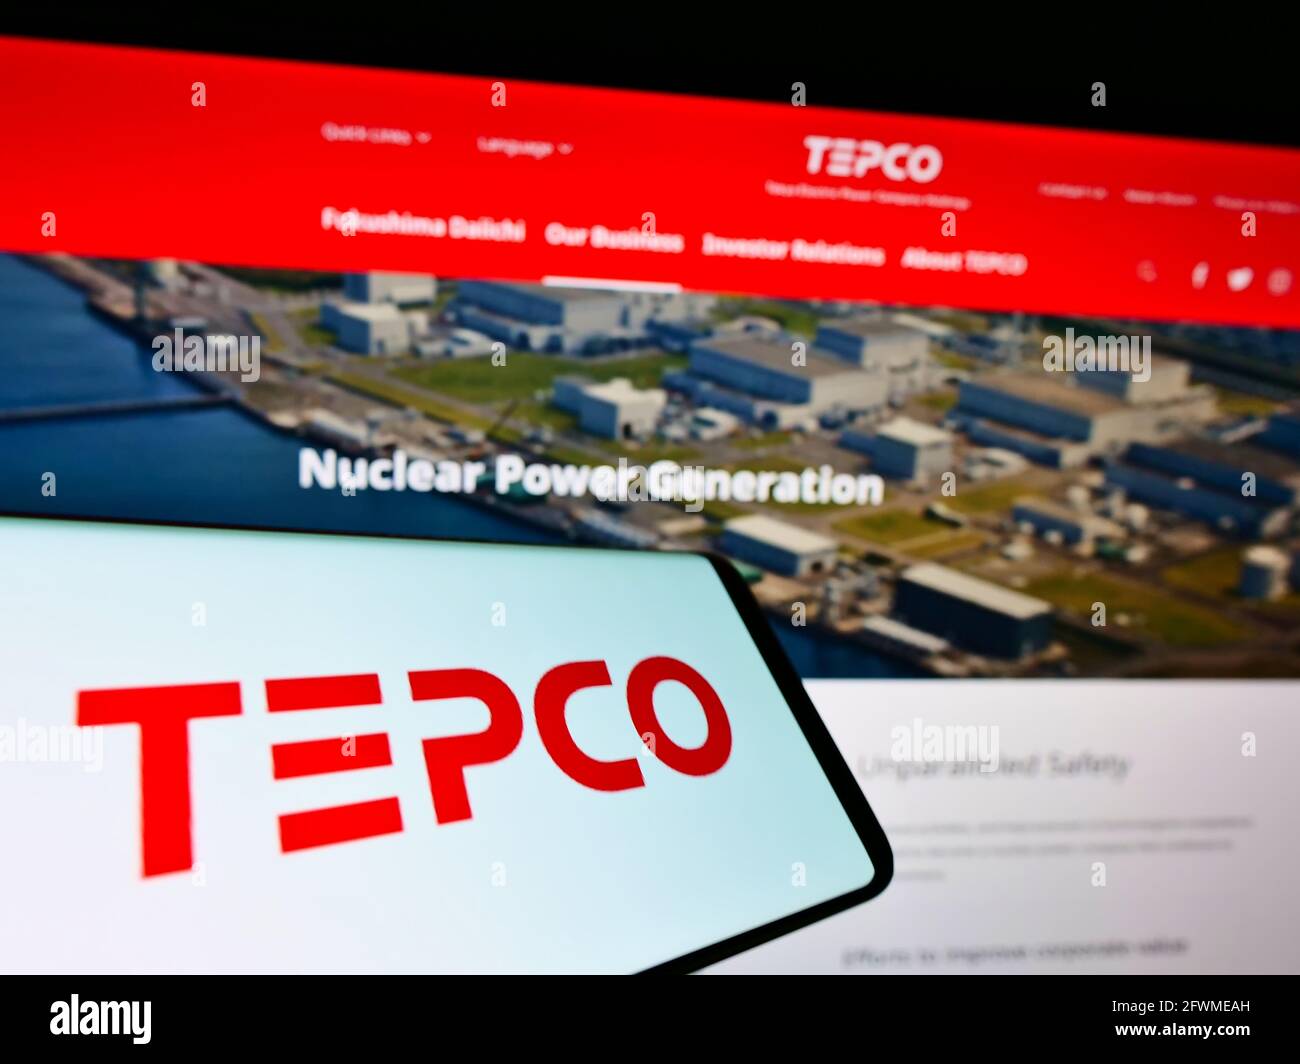 https://c8.alamy.com/comp/2FWMEAH/cellphone-with-logo-of-tokyo-electric-power-company-holdings-inc-tepco-on-screen-in-front-of-website-focus-on-center-right-of-phone-display-2FWMEAH.jpg